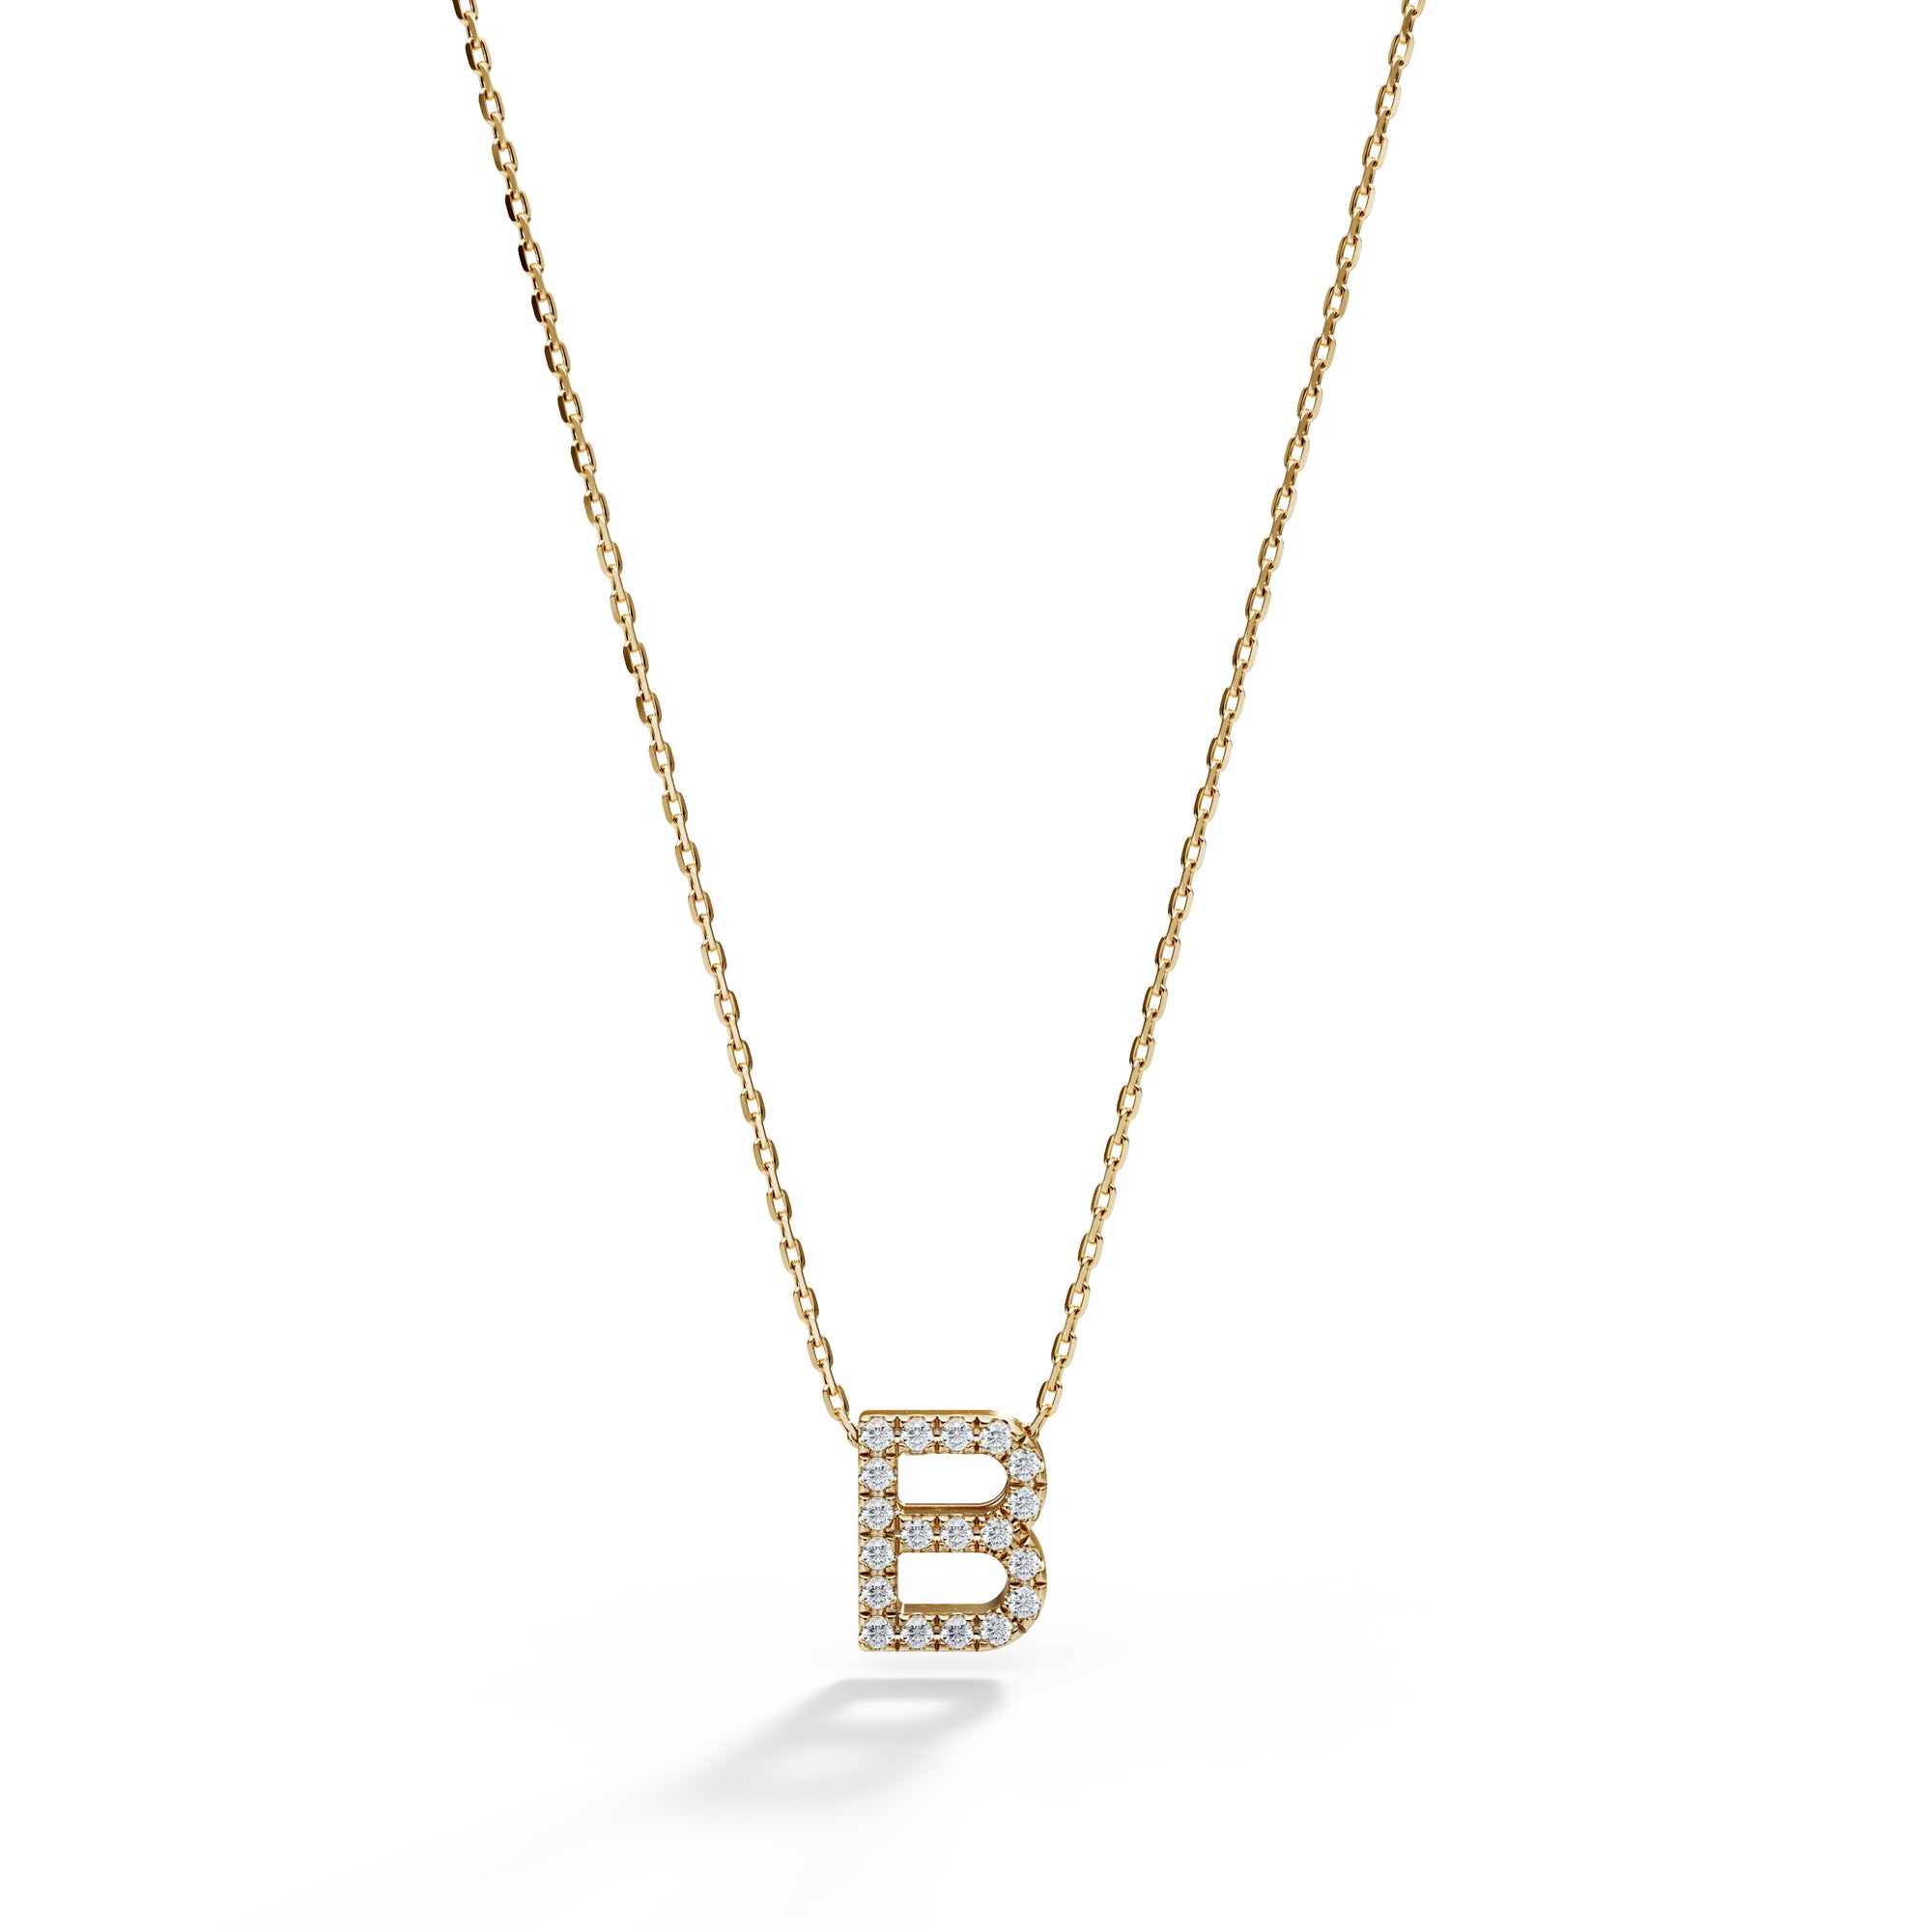 Pavé diamond initial B letter necklace in 14k gold